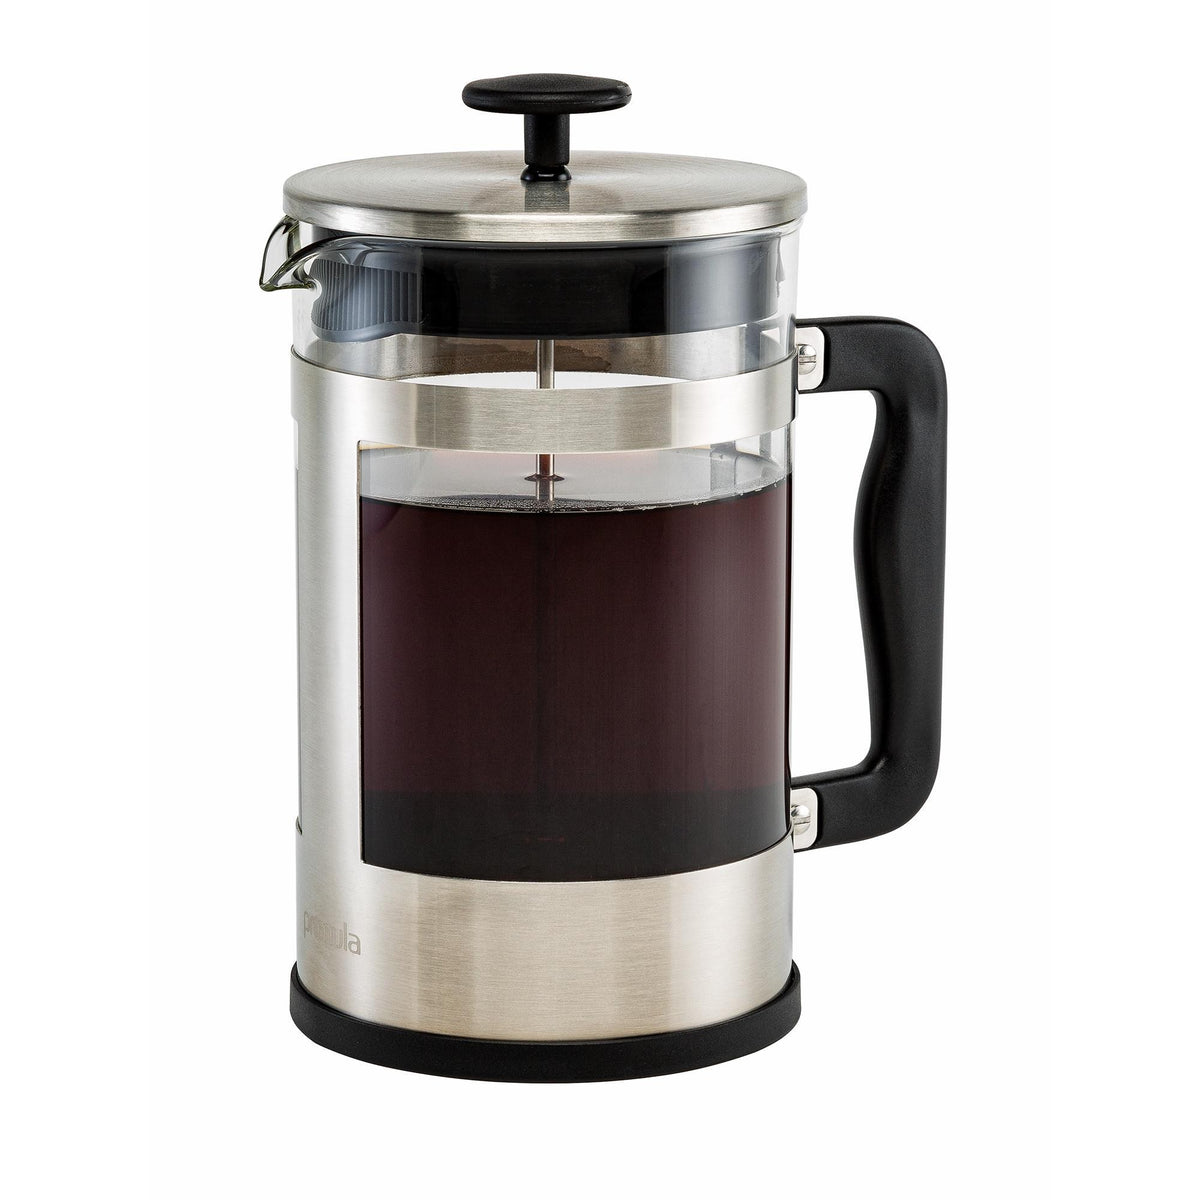 Primula PPBSS-5102 2 In 1 Craft Coffee Maker, 51 Ounce